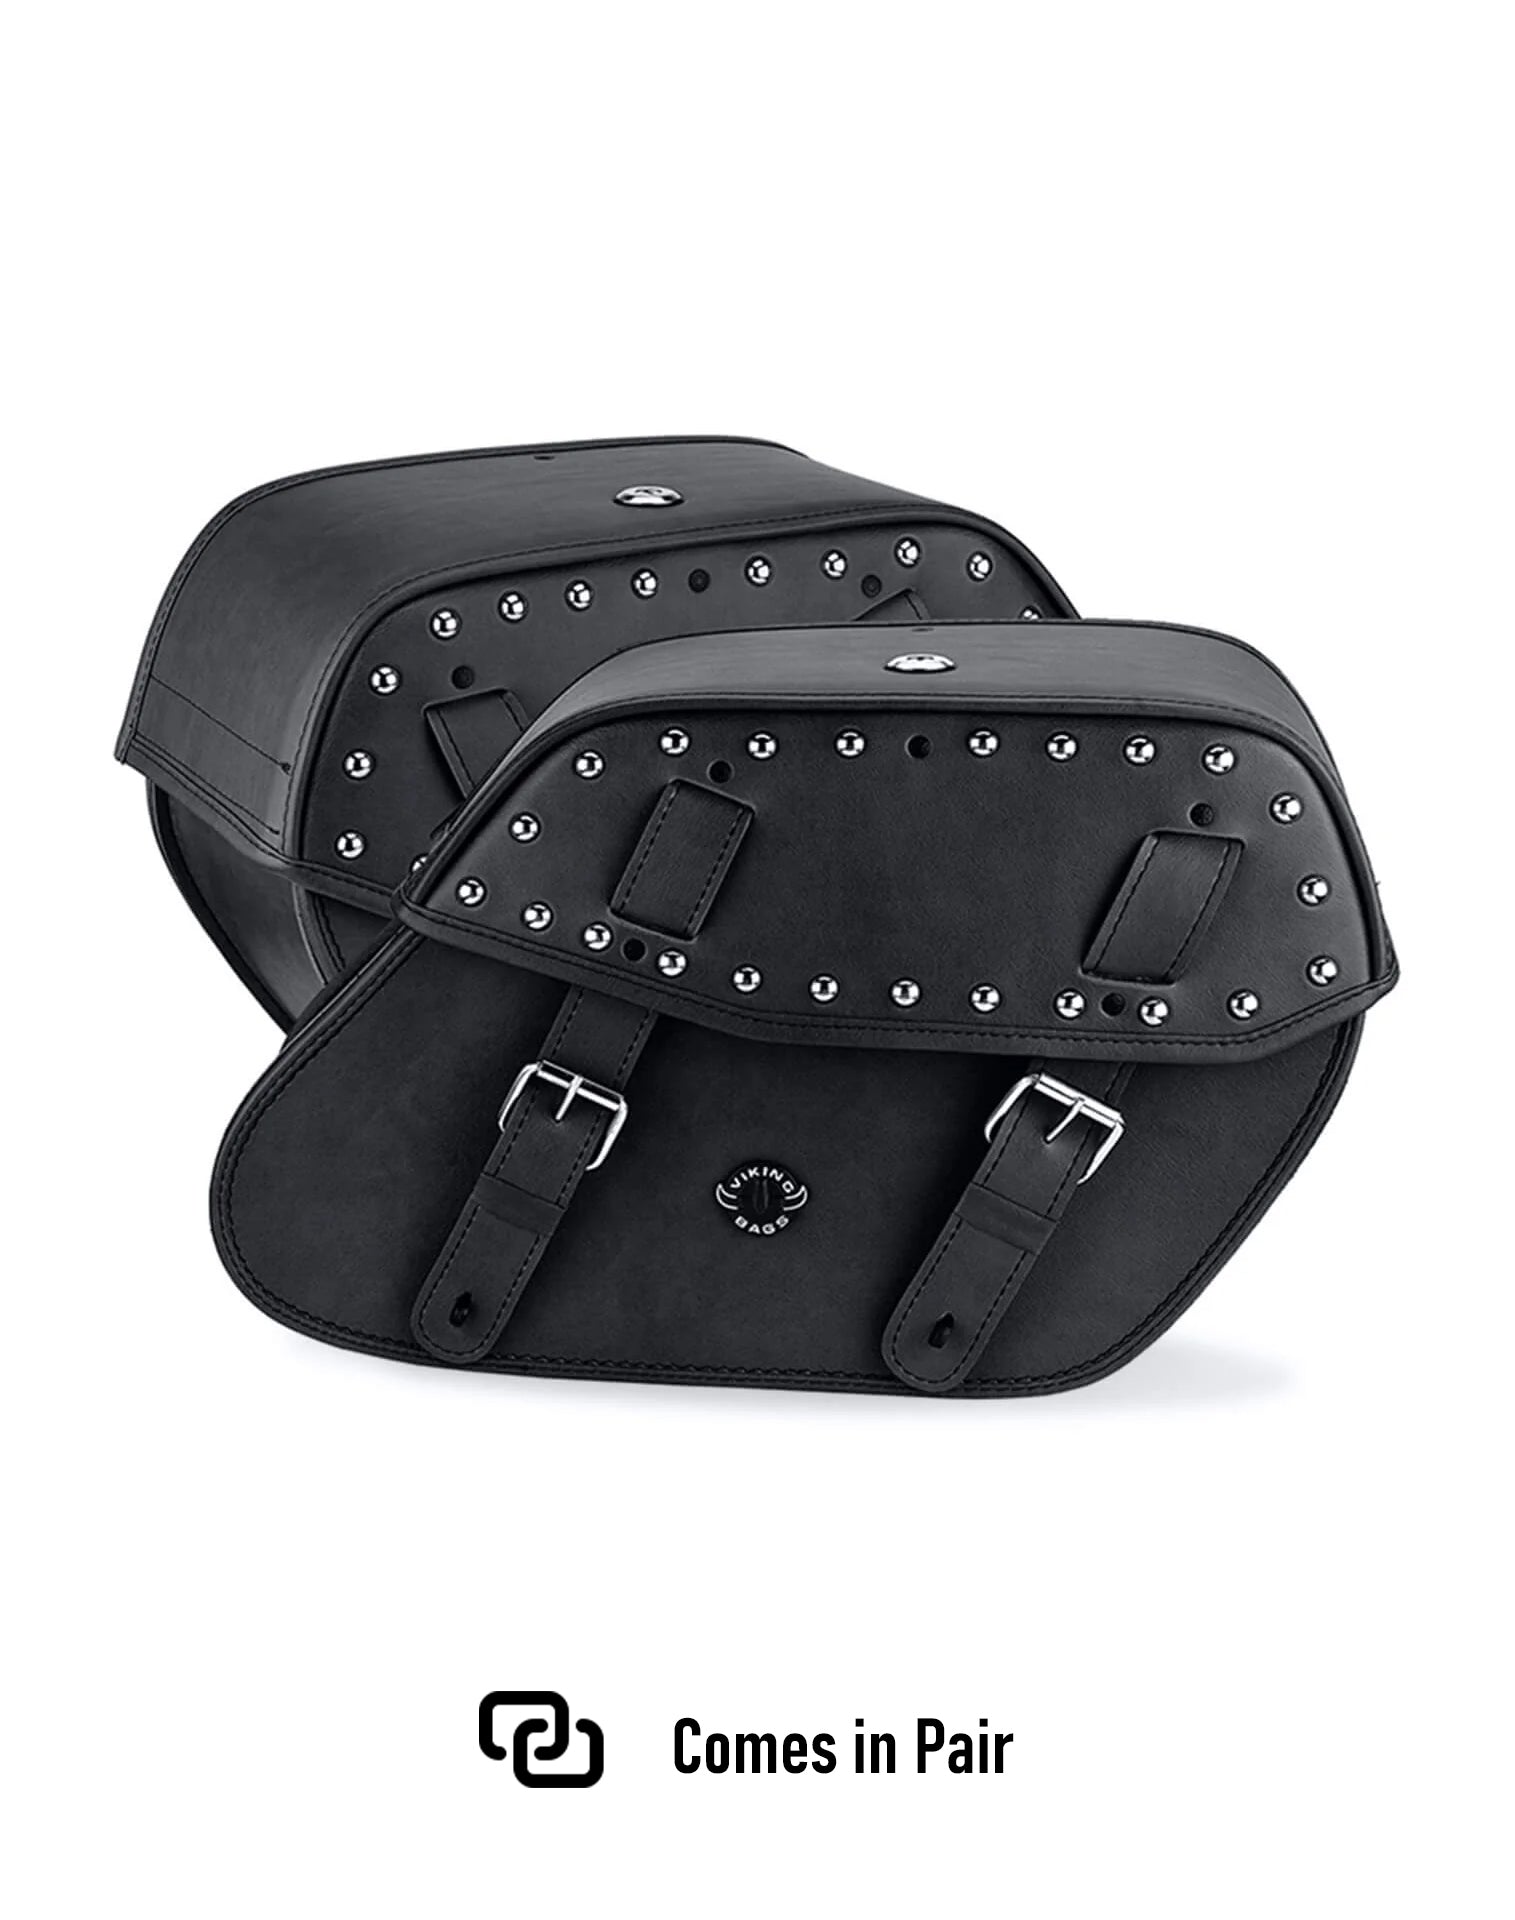 Viking Odin Large Studded Leather Motorcycle Saddlebags For Harley Softail Custom Fxstc Weather Resistant Bags Comes in Pair